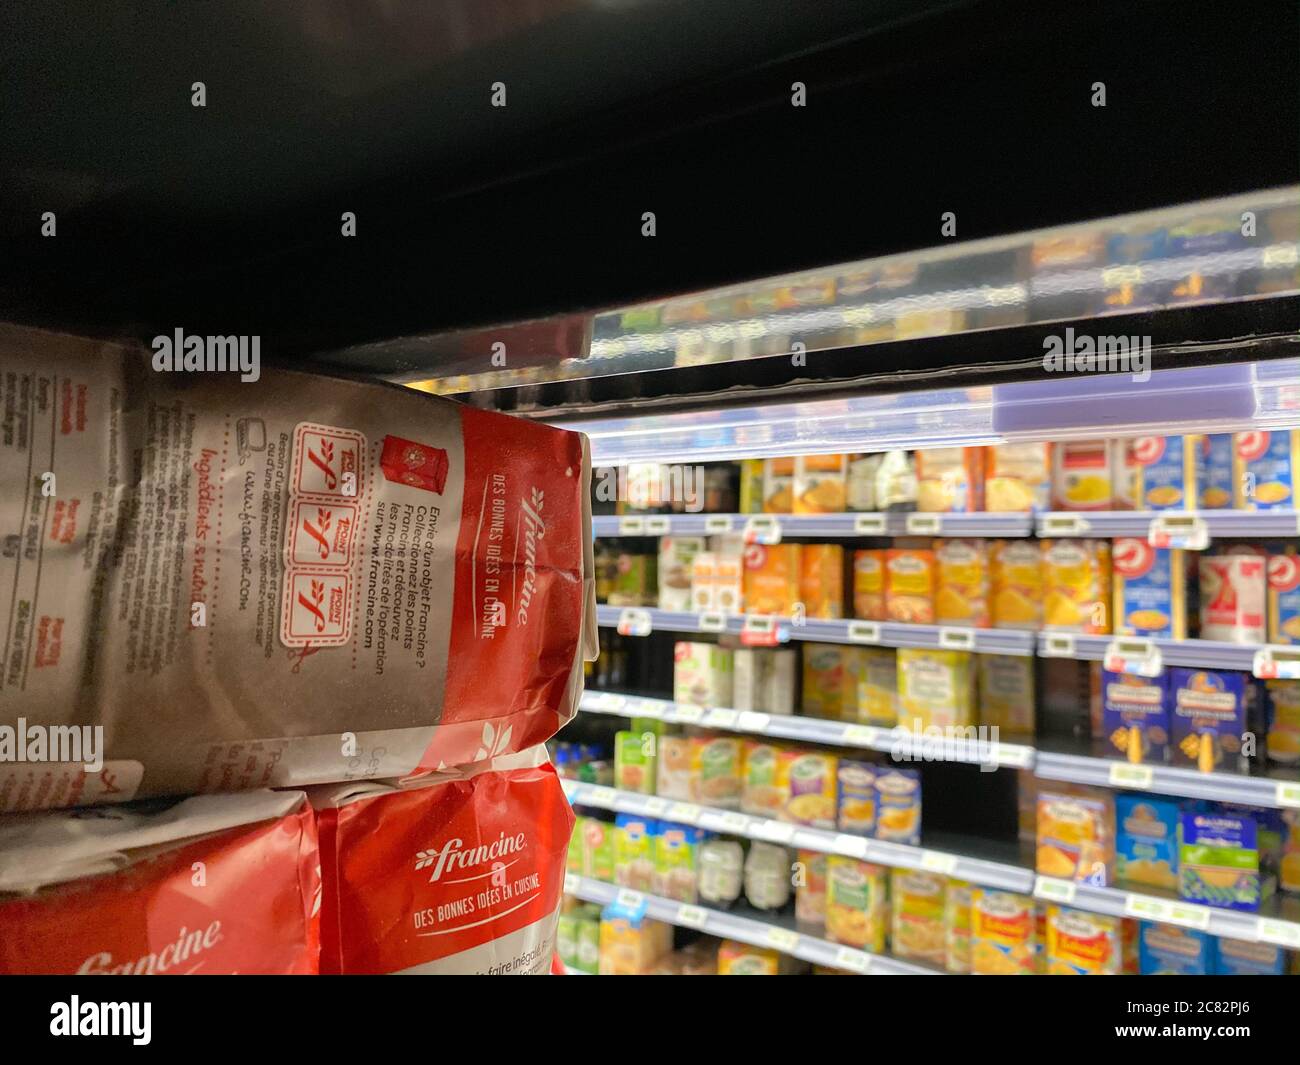 Paris, France - Mar 13, 2020: View from inside the empty shelves of food products in French supermarket during Coronavirus pandemic lockdown - Francine flour shopping Stock Photo